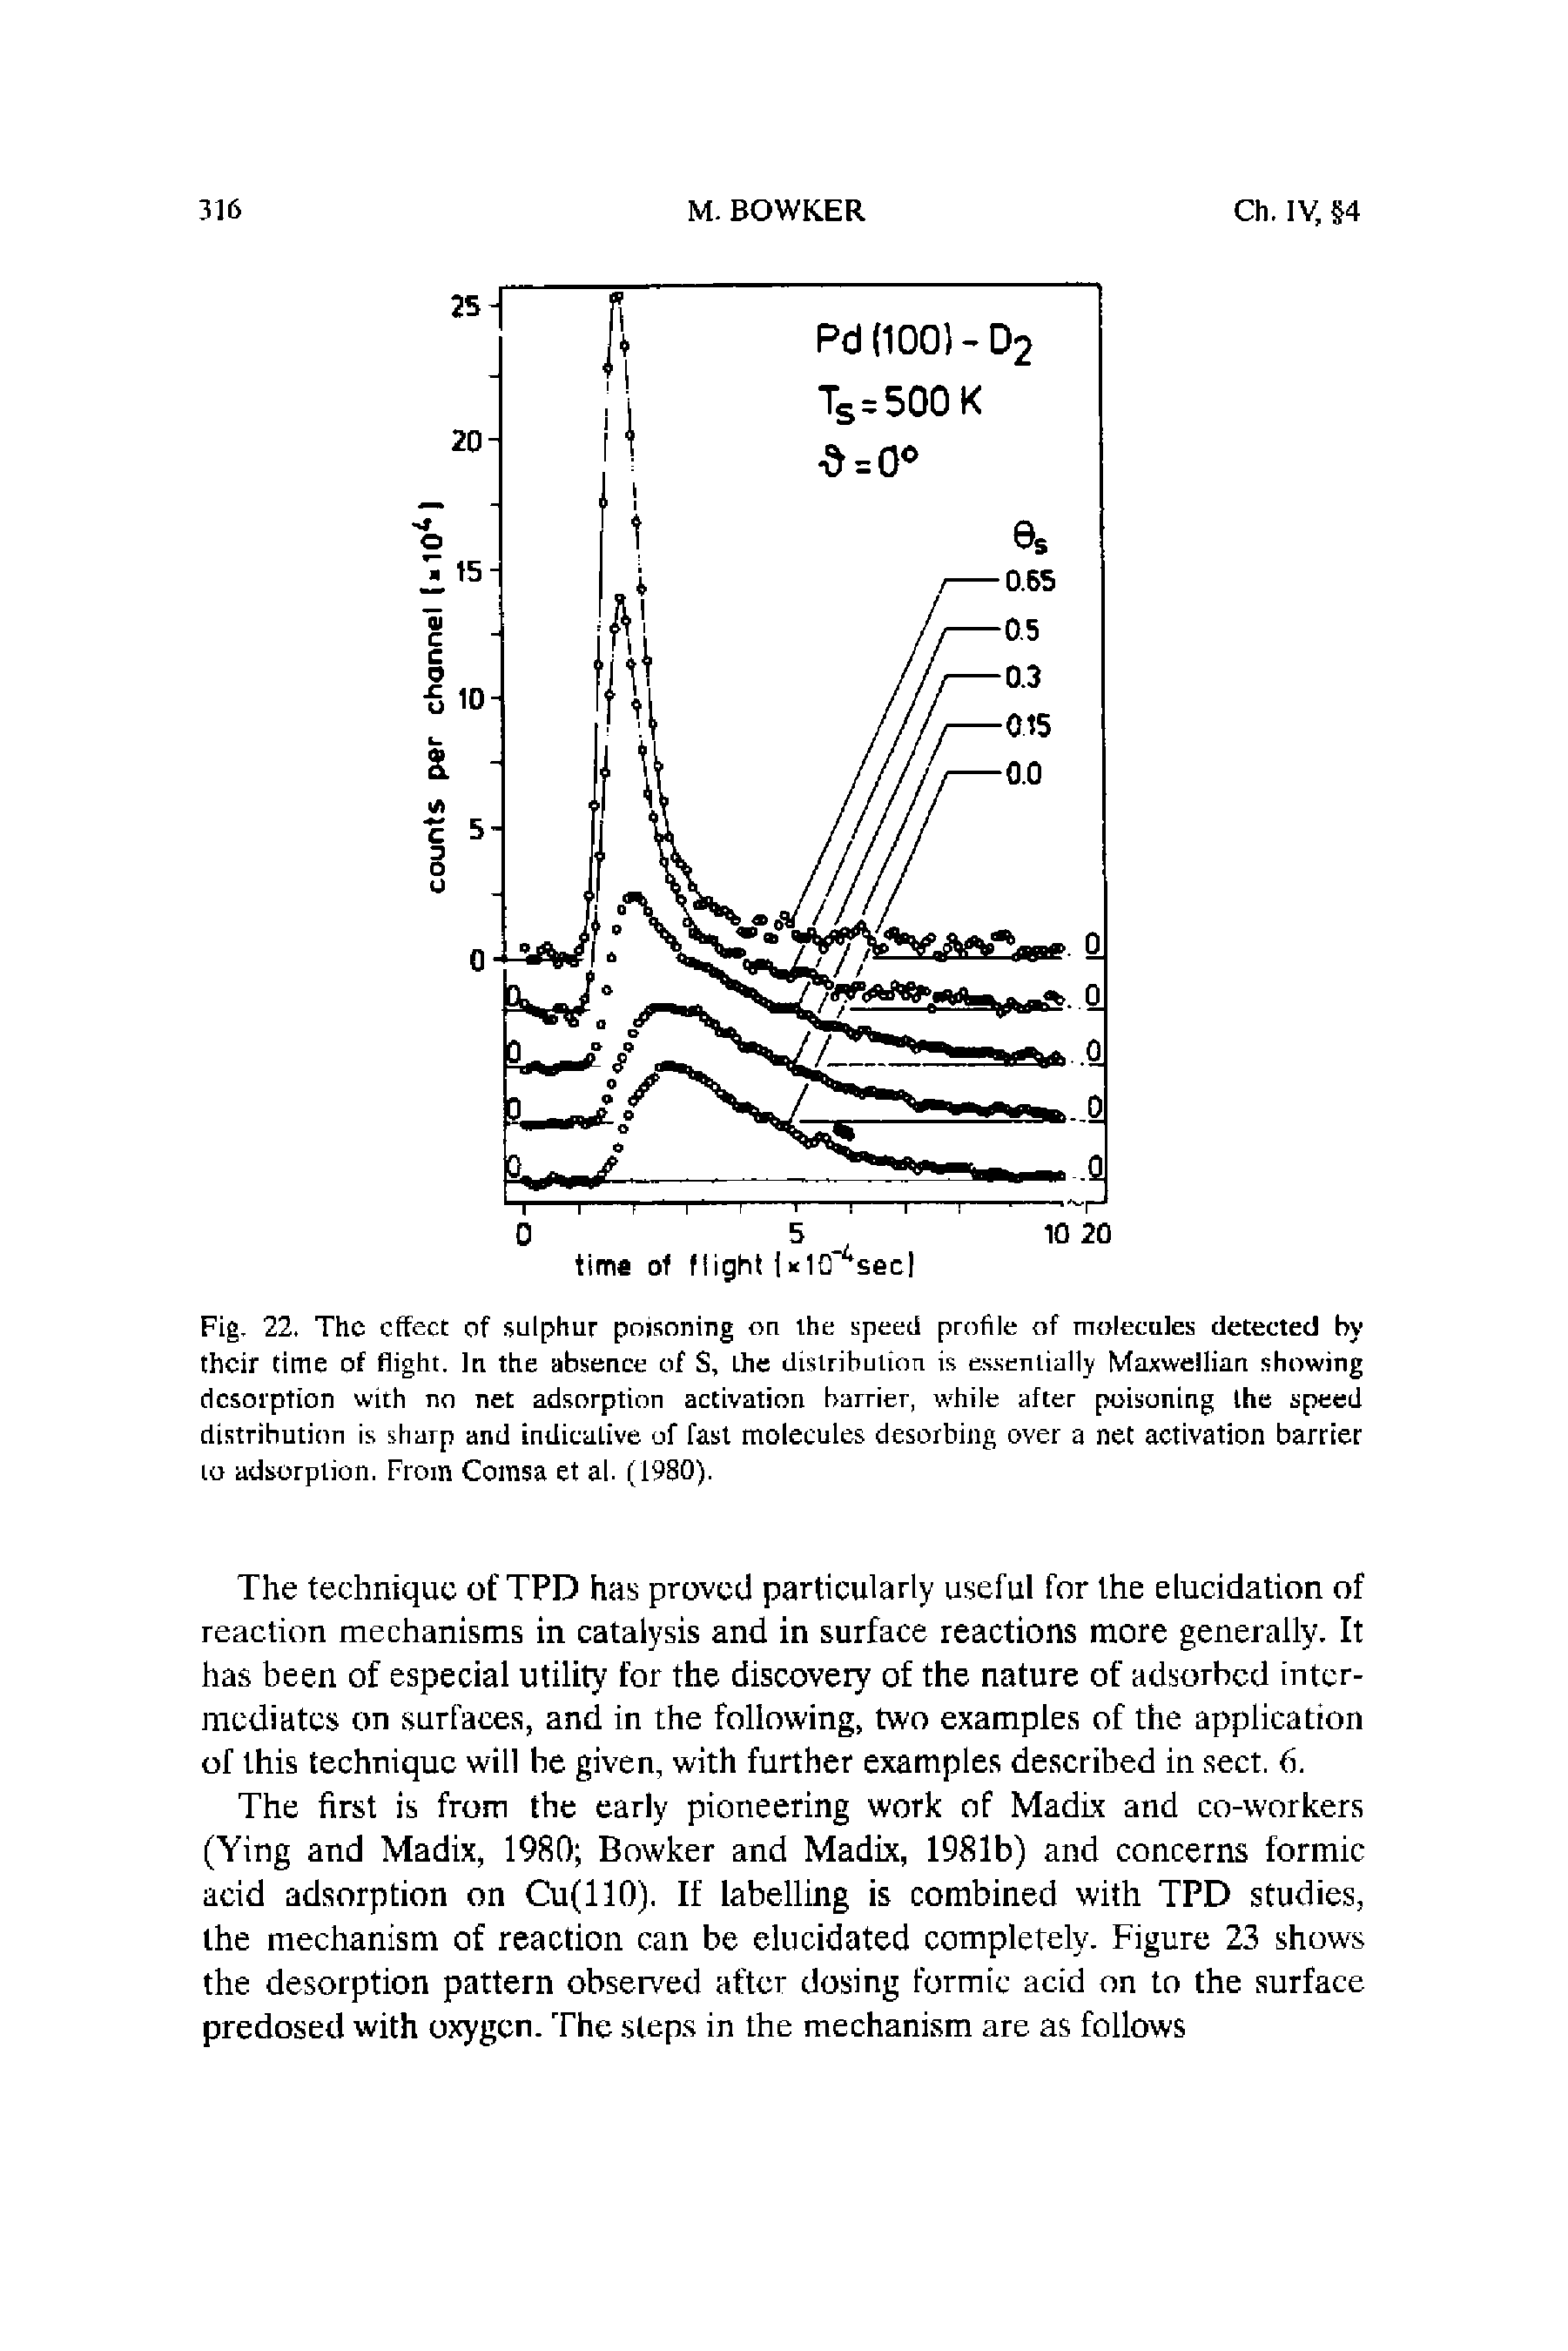 Fig. 22. The effect of sulphur poisoning on the speed profile of molecules detected by their time of flight. In the absence of S, Lhe distribution is essentially Maxwellian showing desorption with no net adsorption activation barrier, while after poisoning the speed distribution is sharp and indicative of fast molecules desorbing over a net activation barrier to adsorption. From Comsa et al. (19S0).